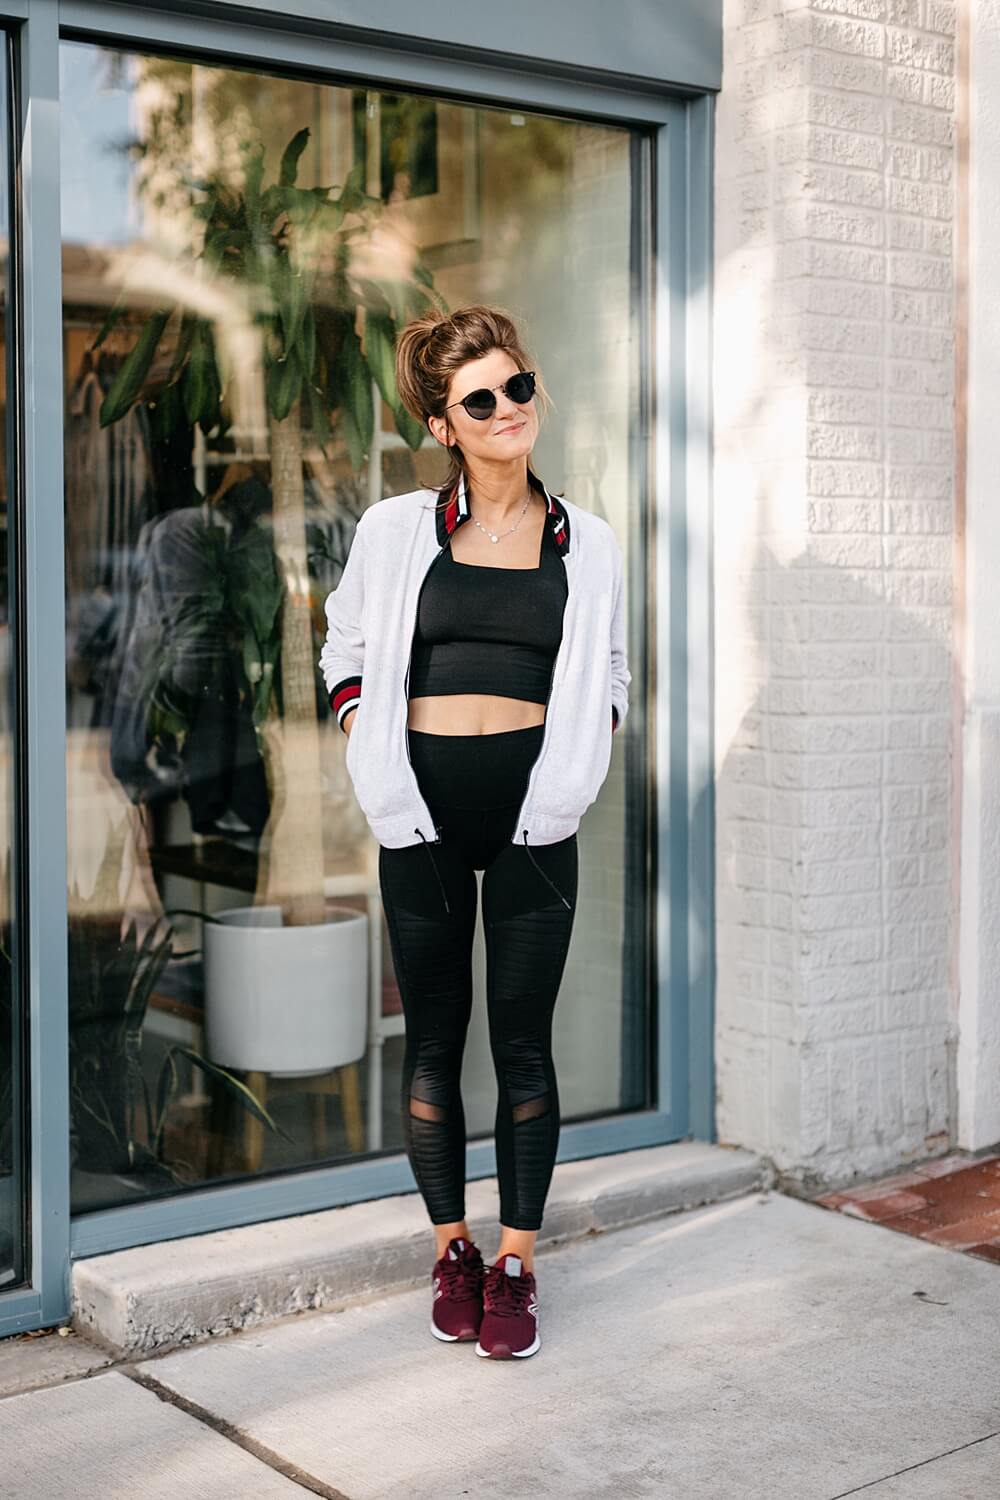 athleisure outfit all black high waisted leggings and sports bra with burgundy new balance sneakers